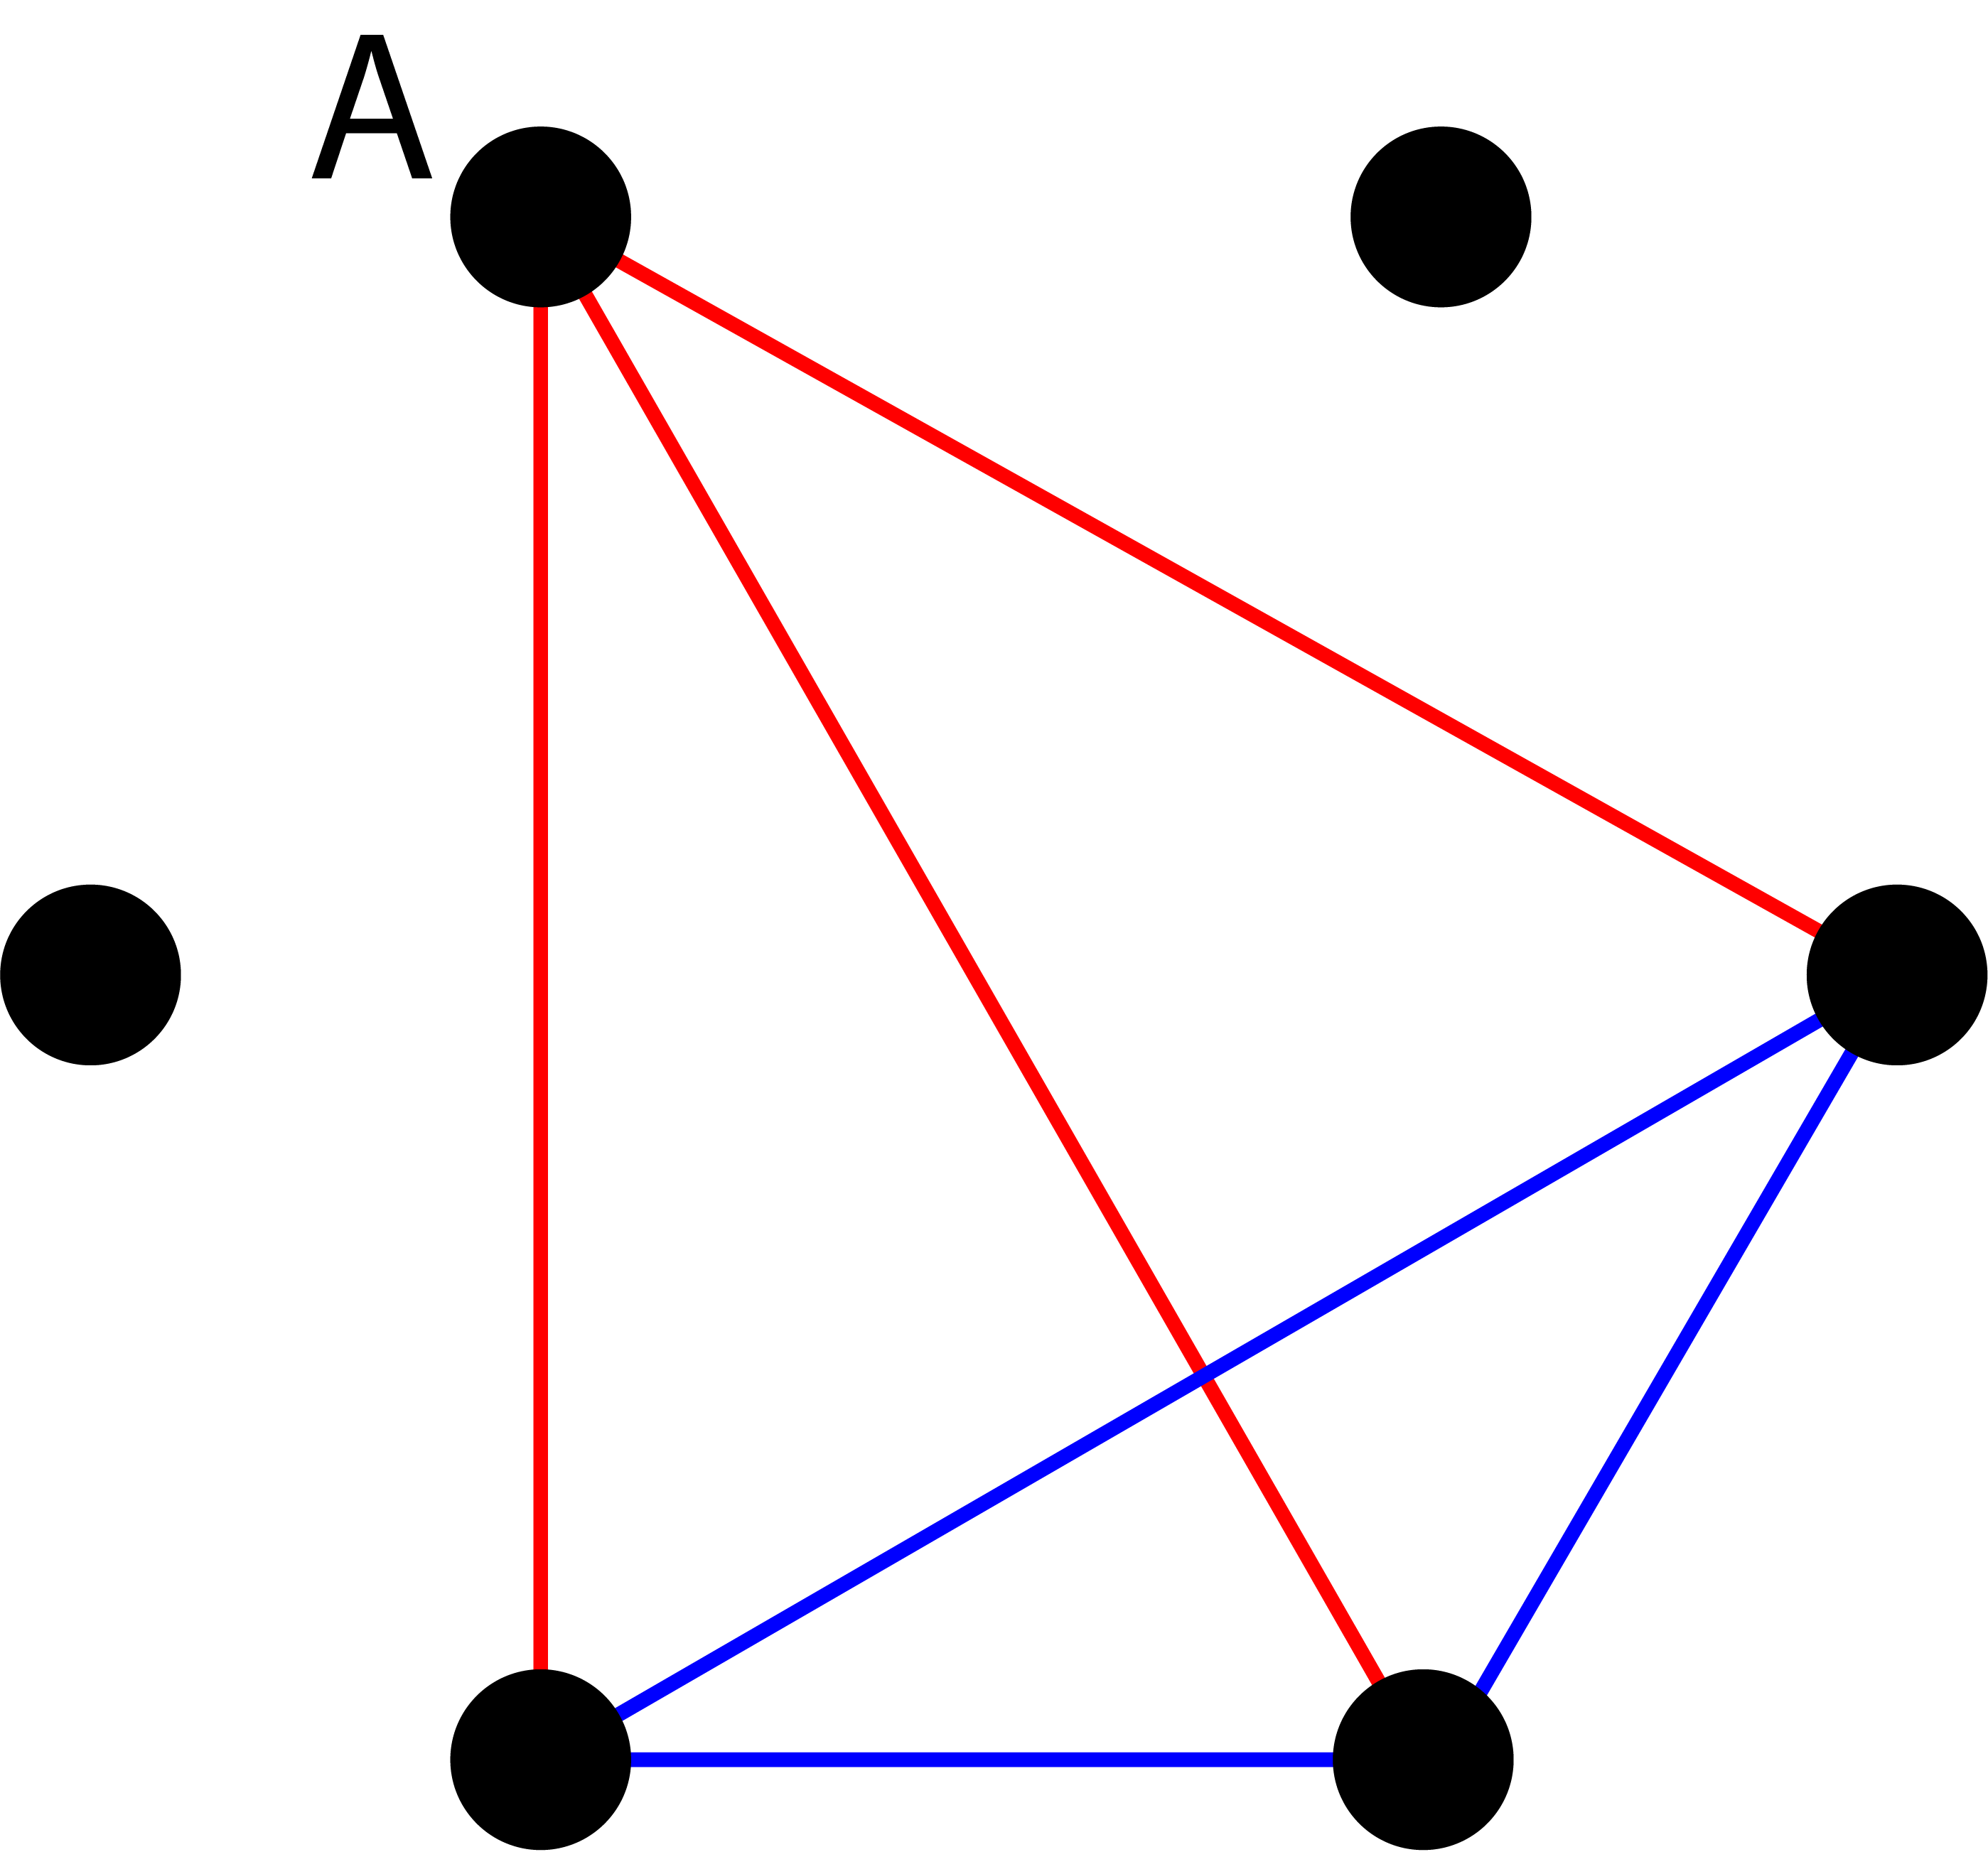 Six dots, three red lines and three blue lines.